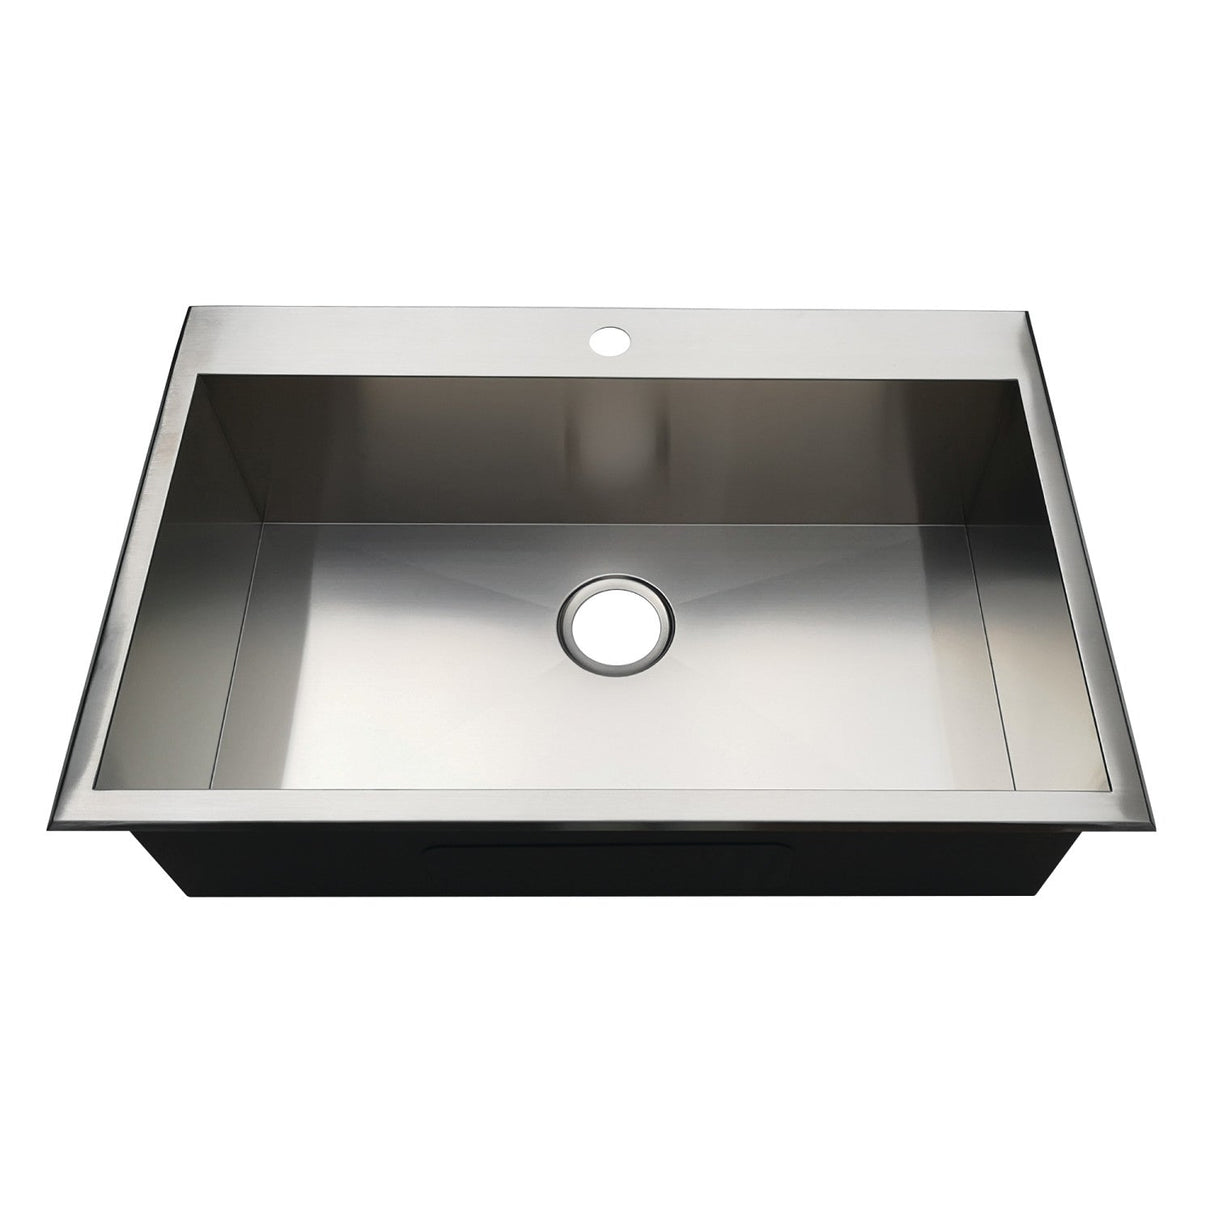 Uptowne KDS322191BN 31.5-Inch Stainless Steel Self-Rimming 1-Hole Single Bowl Drop-In Kitchen Sink, Brushed